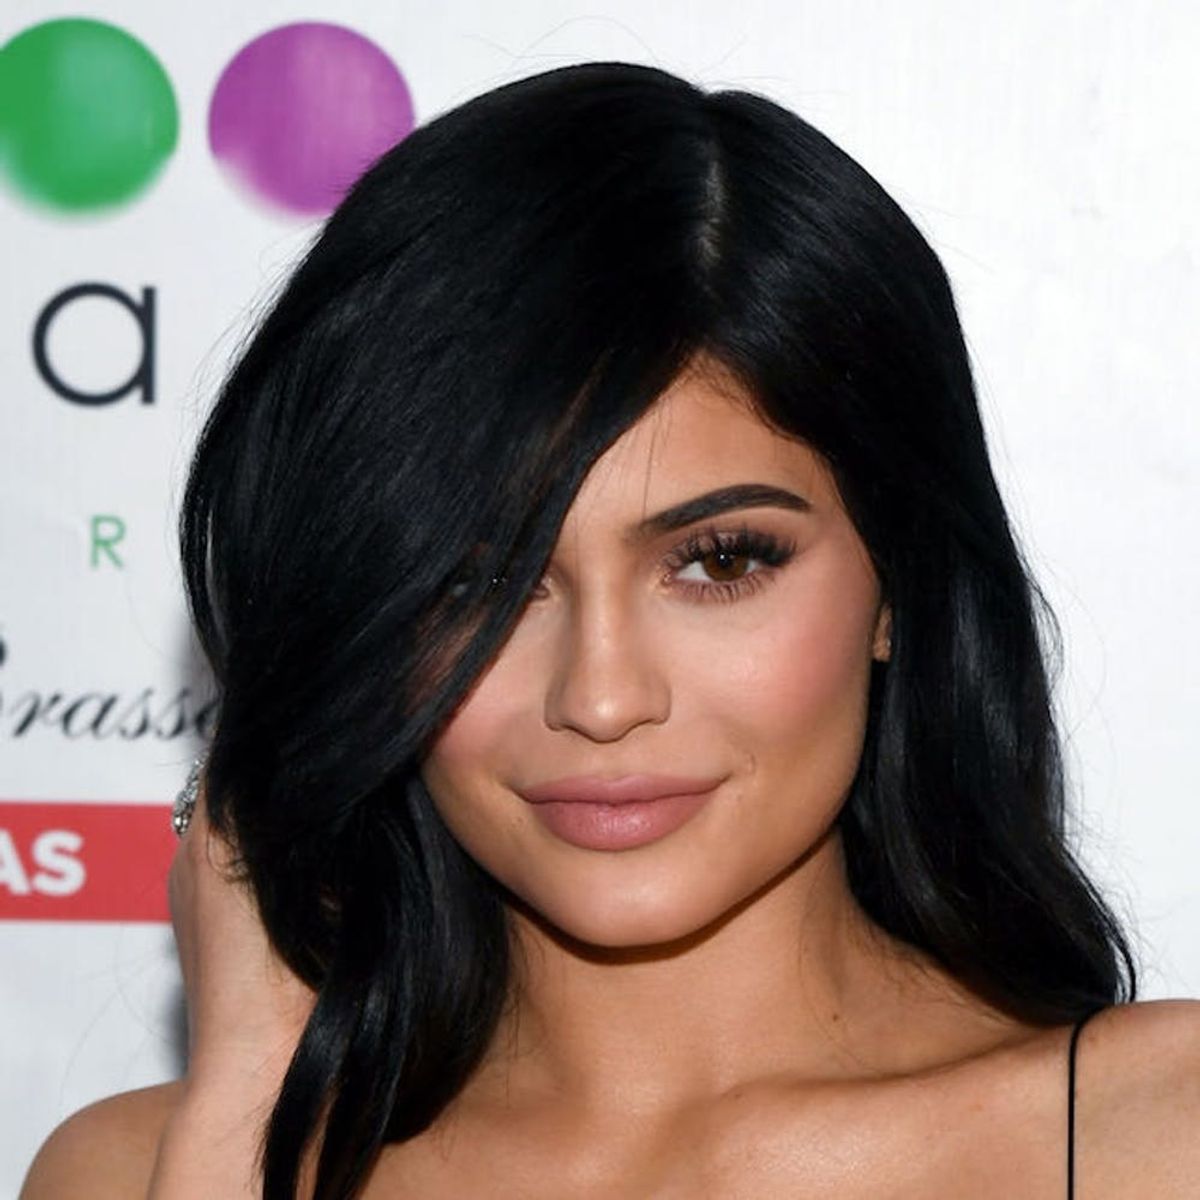 Here’s What We Know About Kylie Jenner’s New Show, Life of Kylie